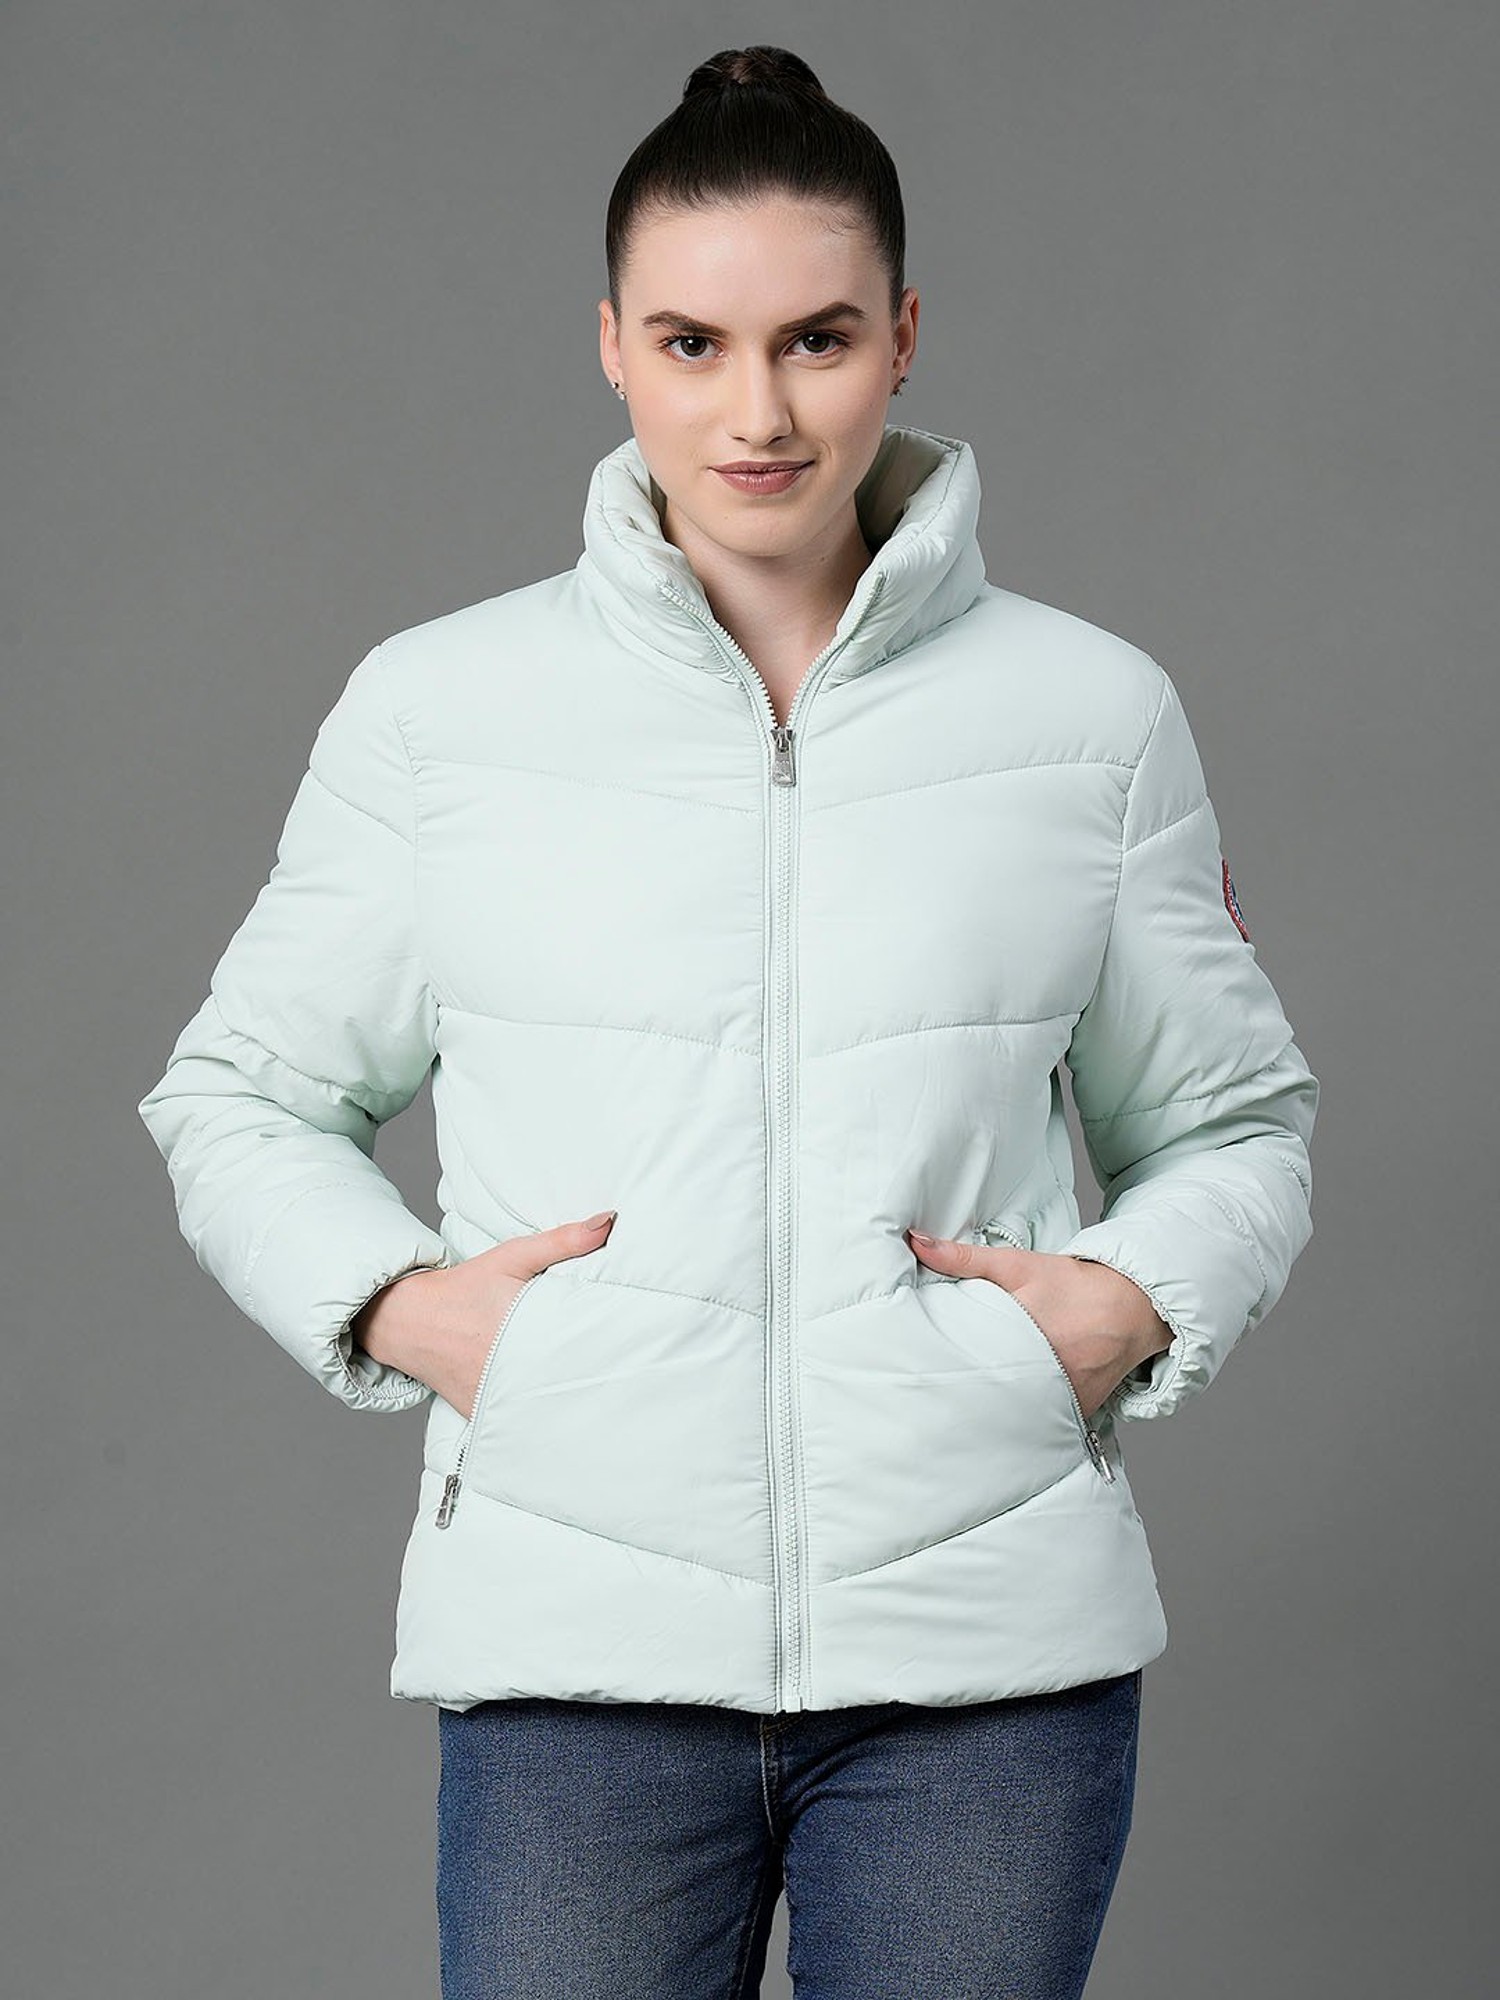 Womens Jackets|Buy Jackets for Women at Great Prices|Redtape